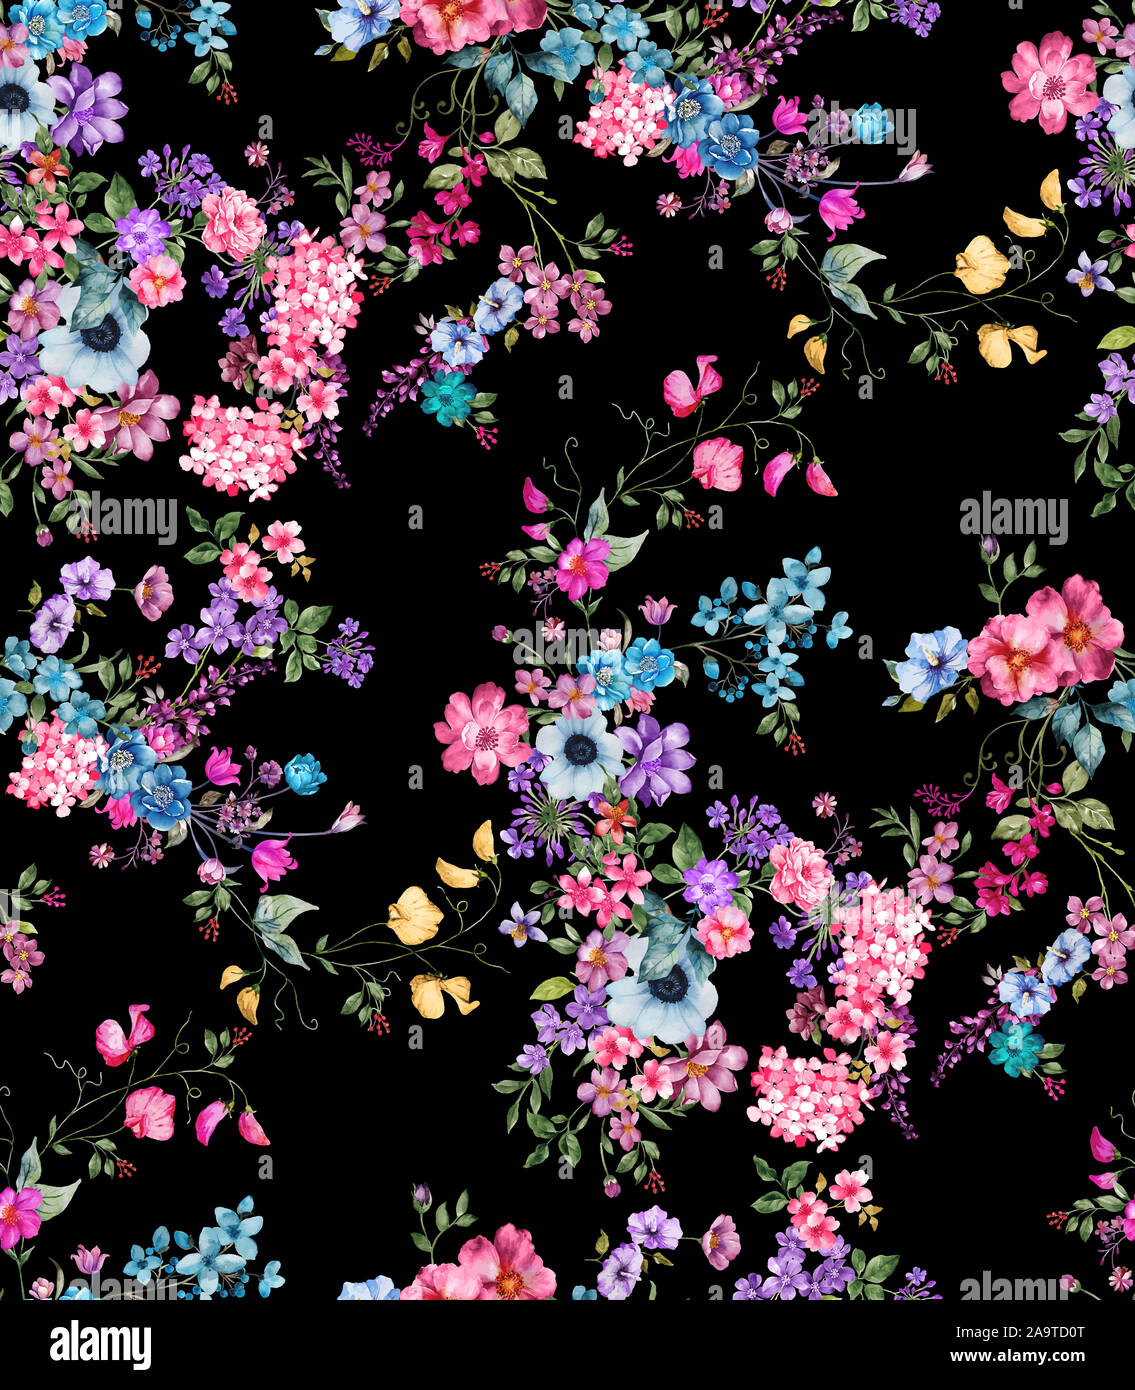 Seamless Repeating Pattern With Hand Painted Black Flower Blossoms